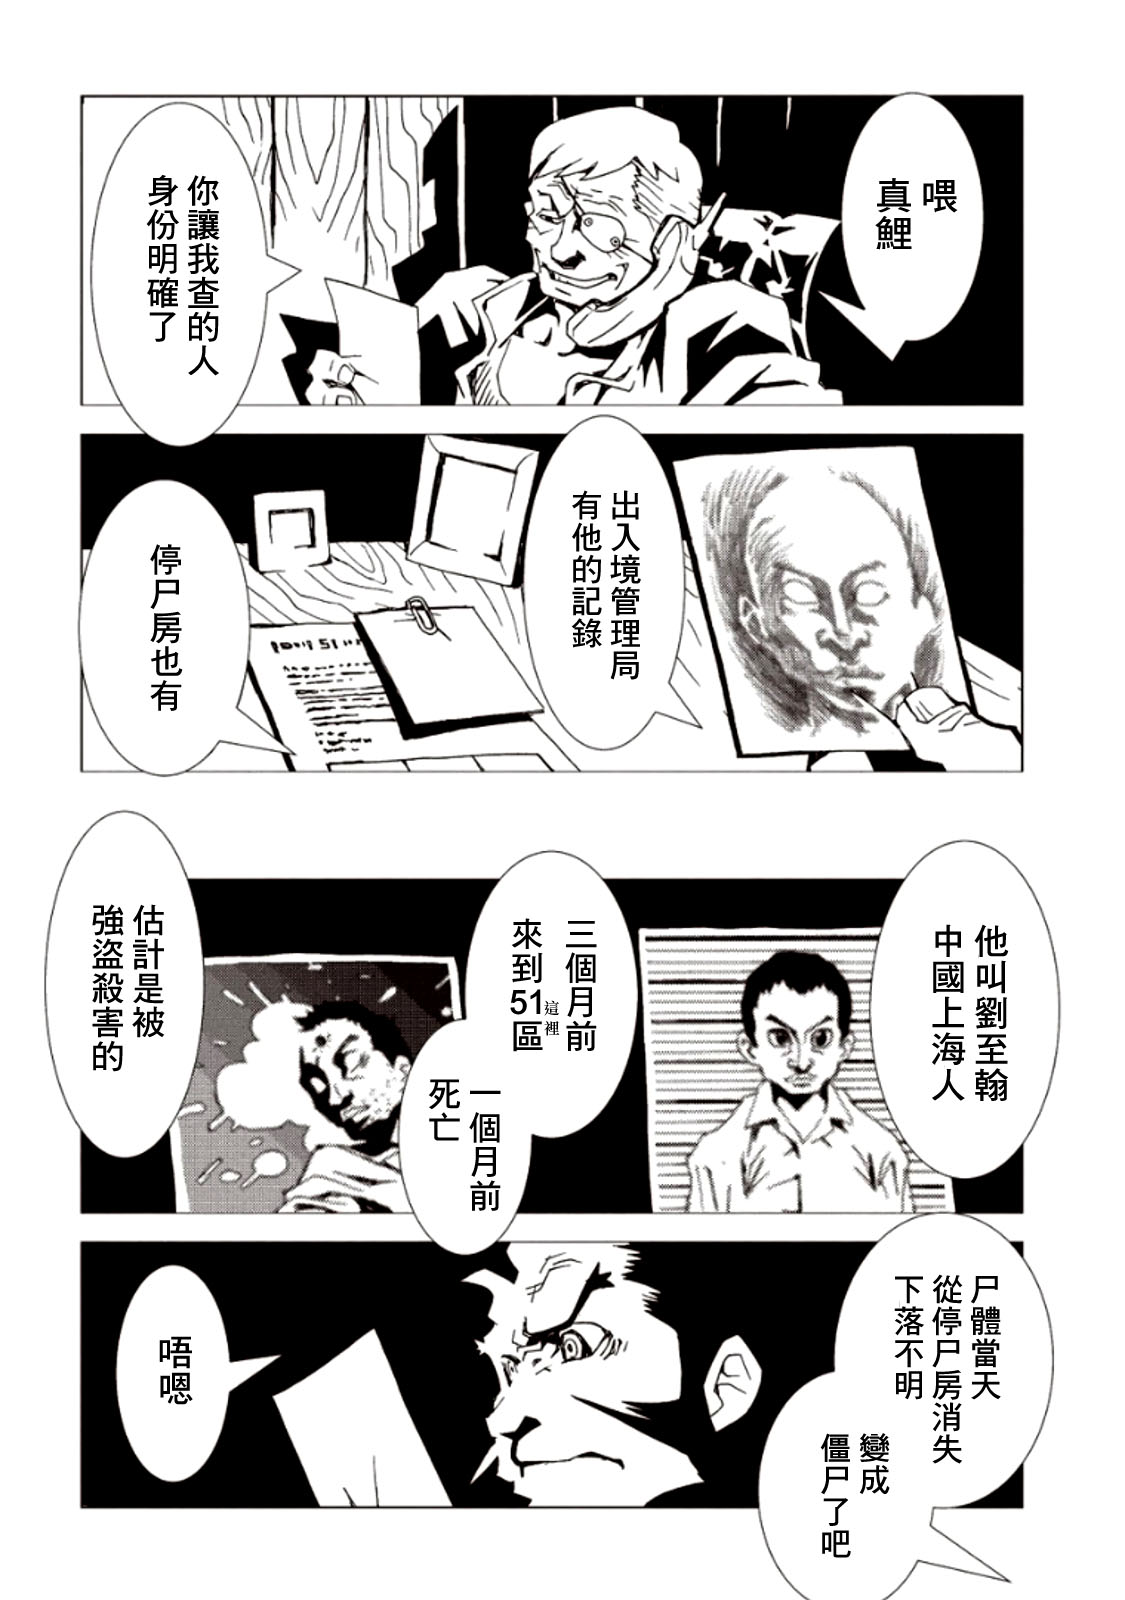 AREA51 - 6卷(1/4) - 4